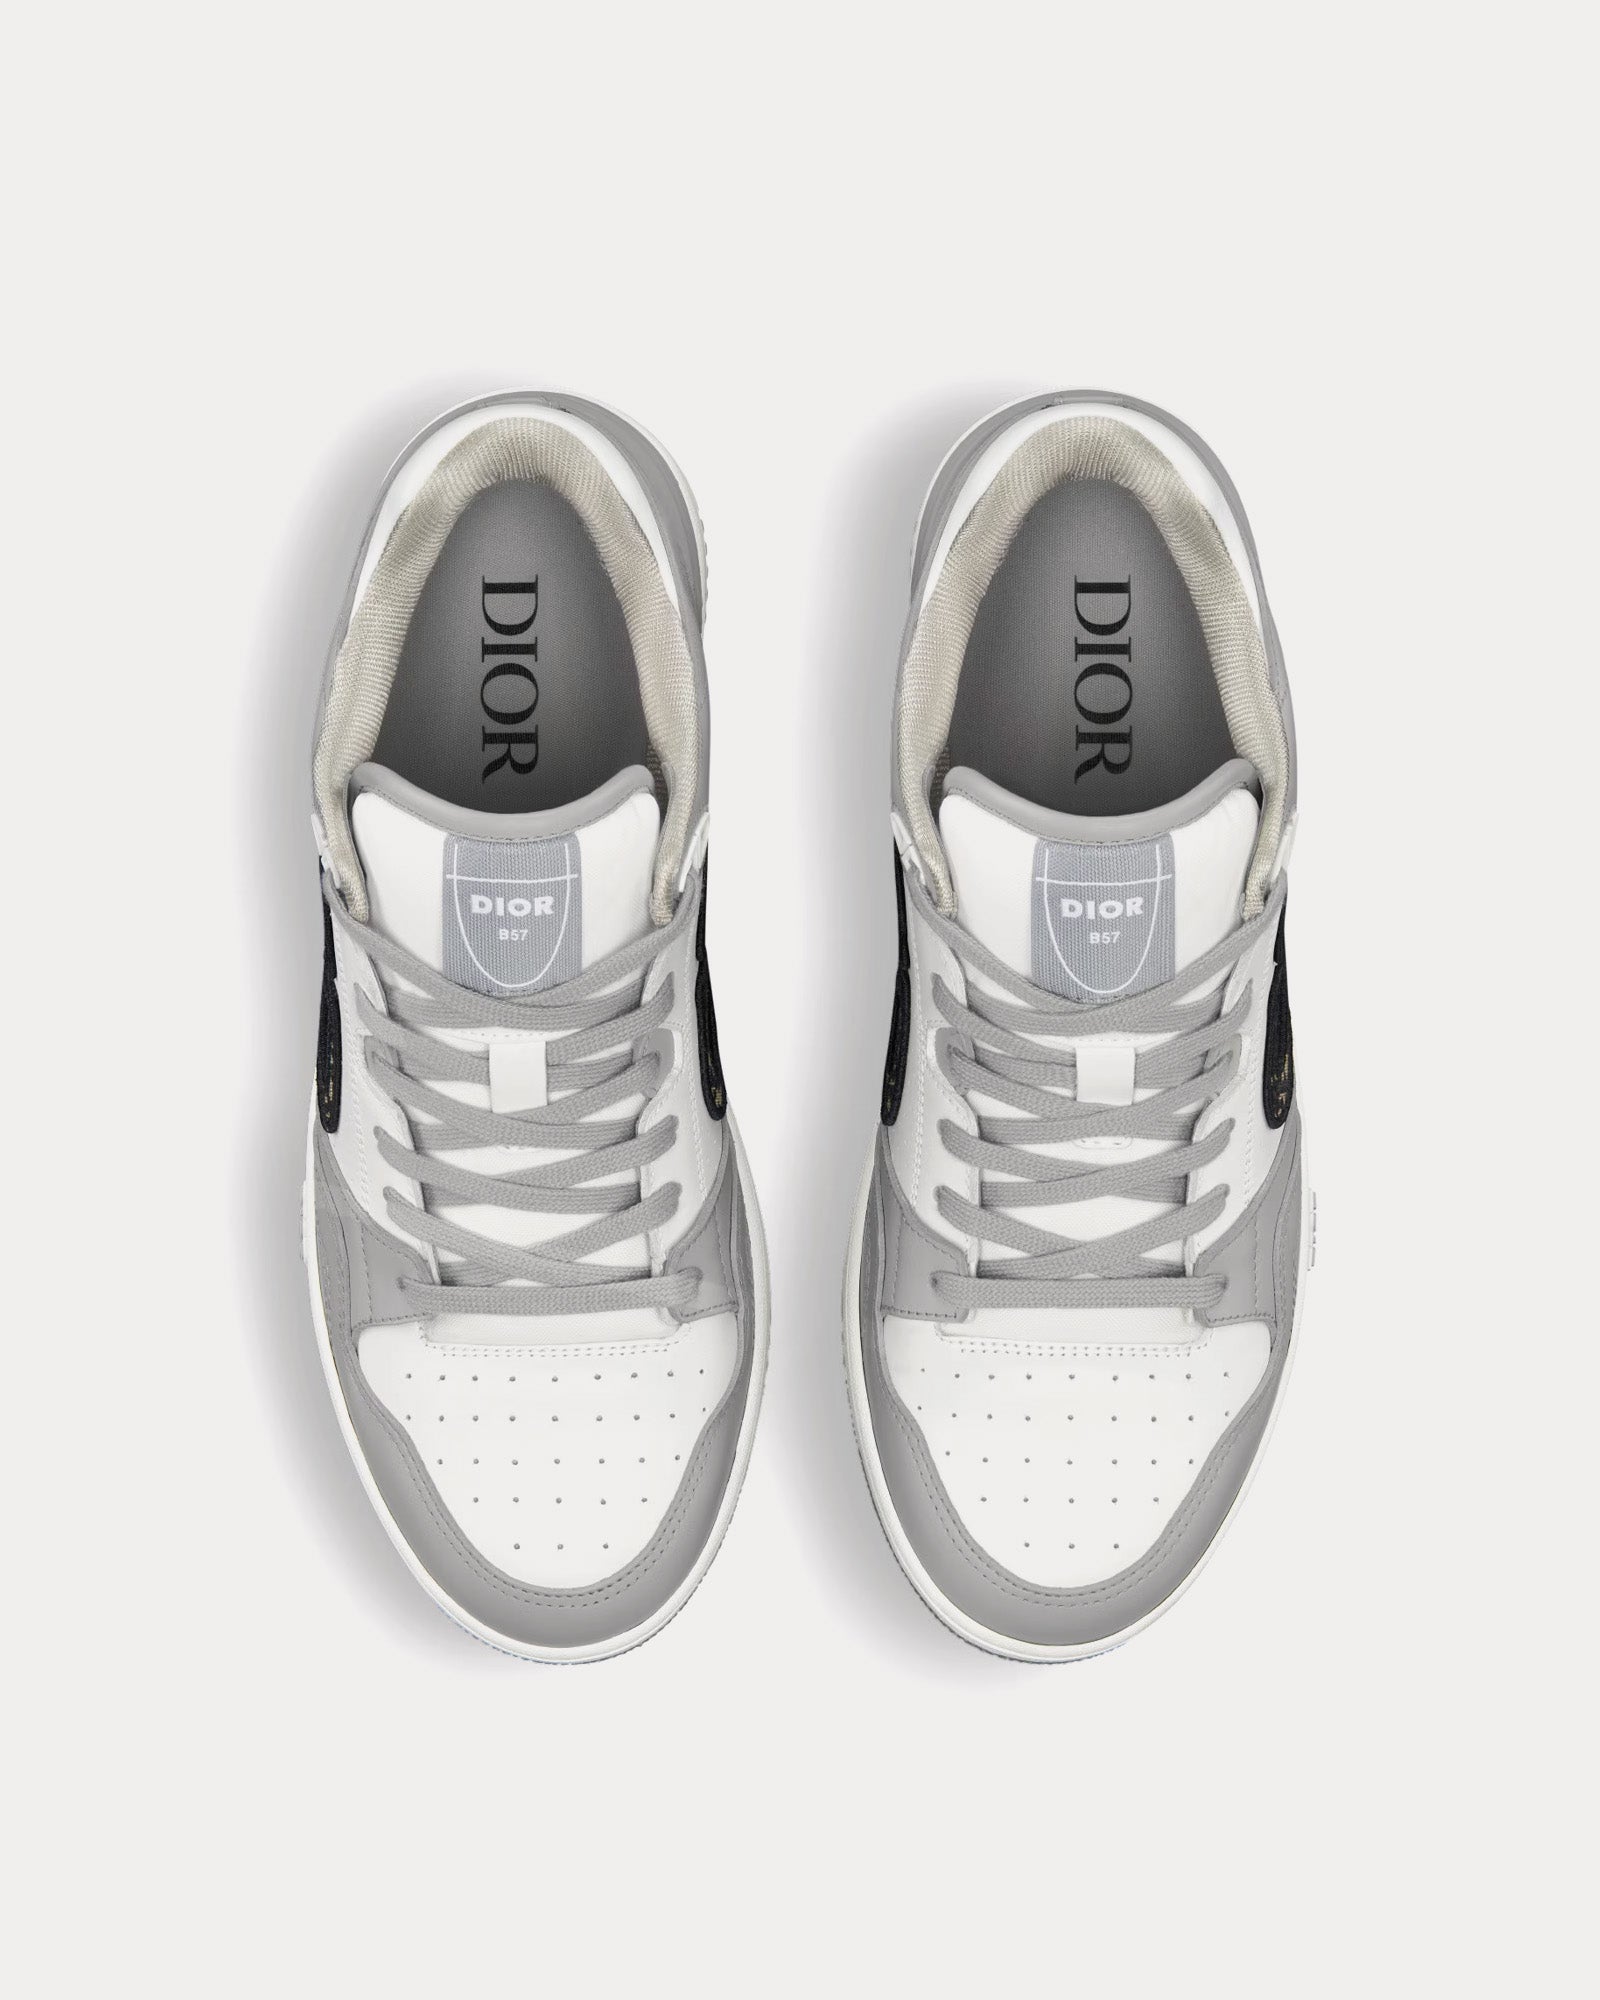 Dior - B57 Dior Gray and White Smooth Calfskin with Beige and Black Dior Oblique Jacquard Low Top Sneakers